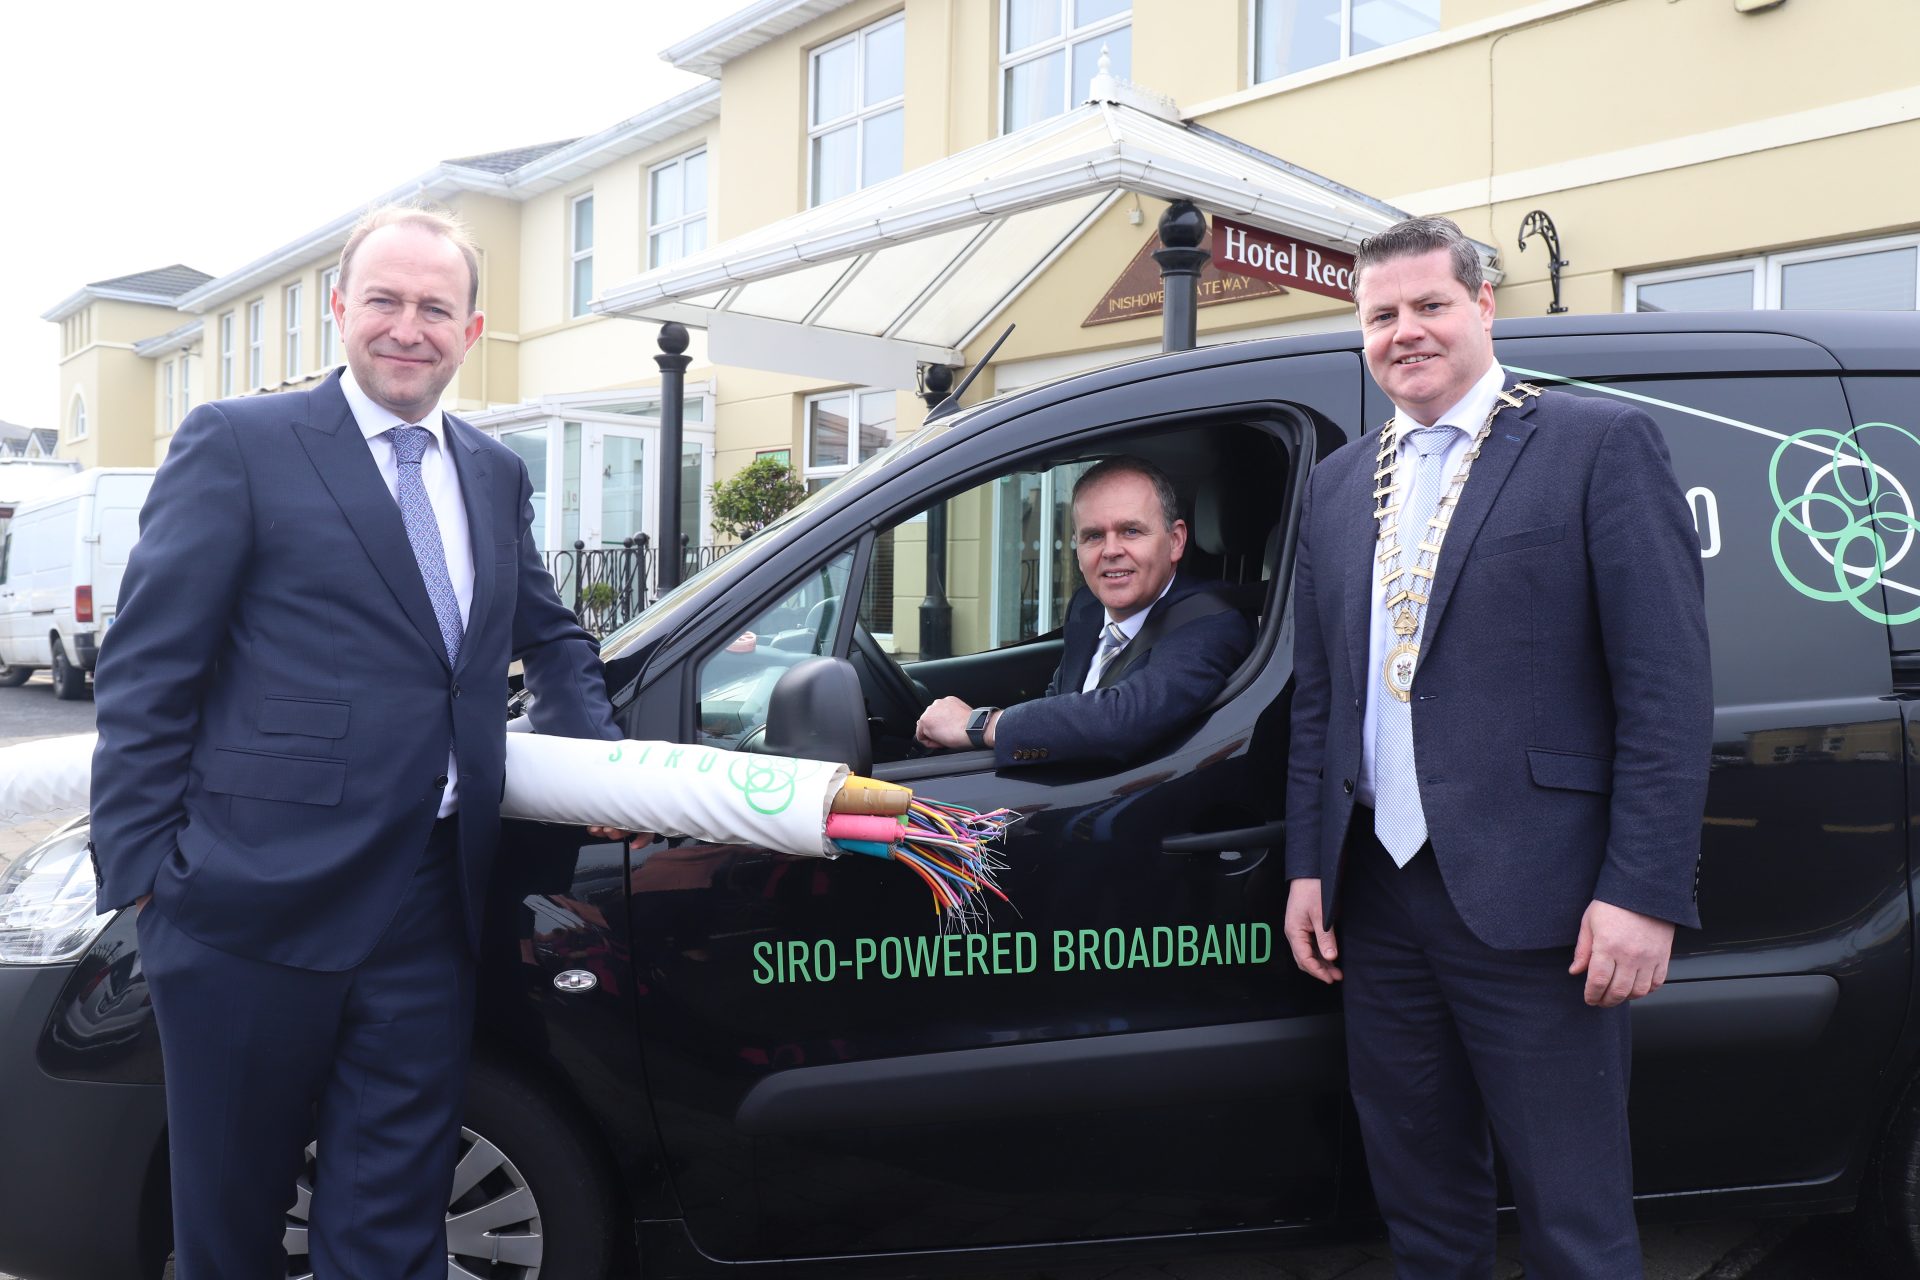 SIRO’s Fibre-to-the-Home broadband rolls out across six new towns in Donegal as part of a new €14 million investment connecting 25,000 premises. €14 Million Fibre Broadband Investment in Donegal By SIRO